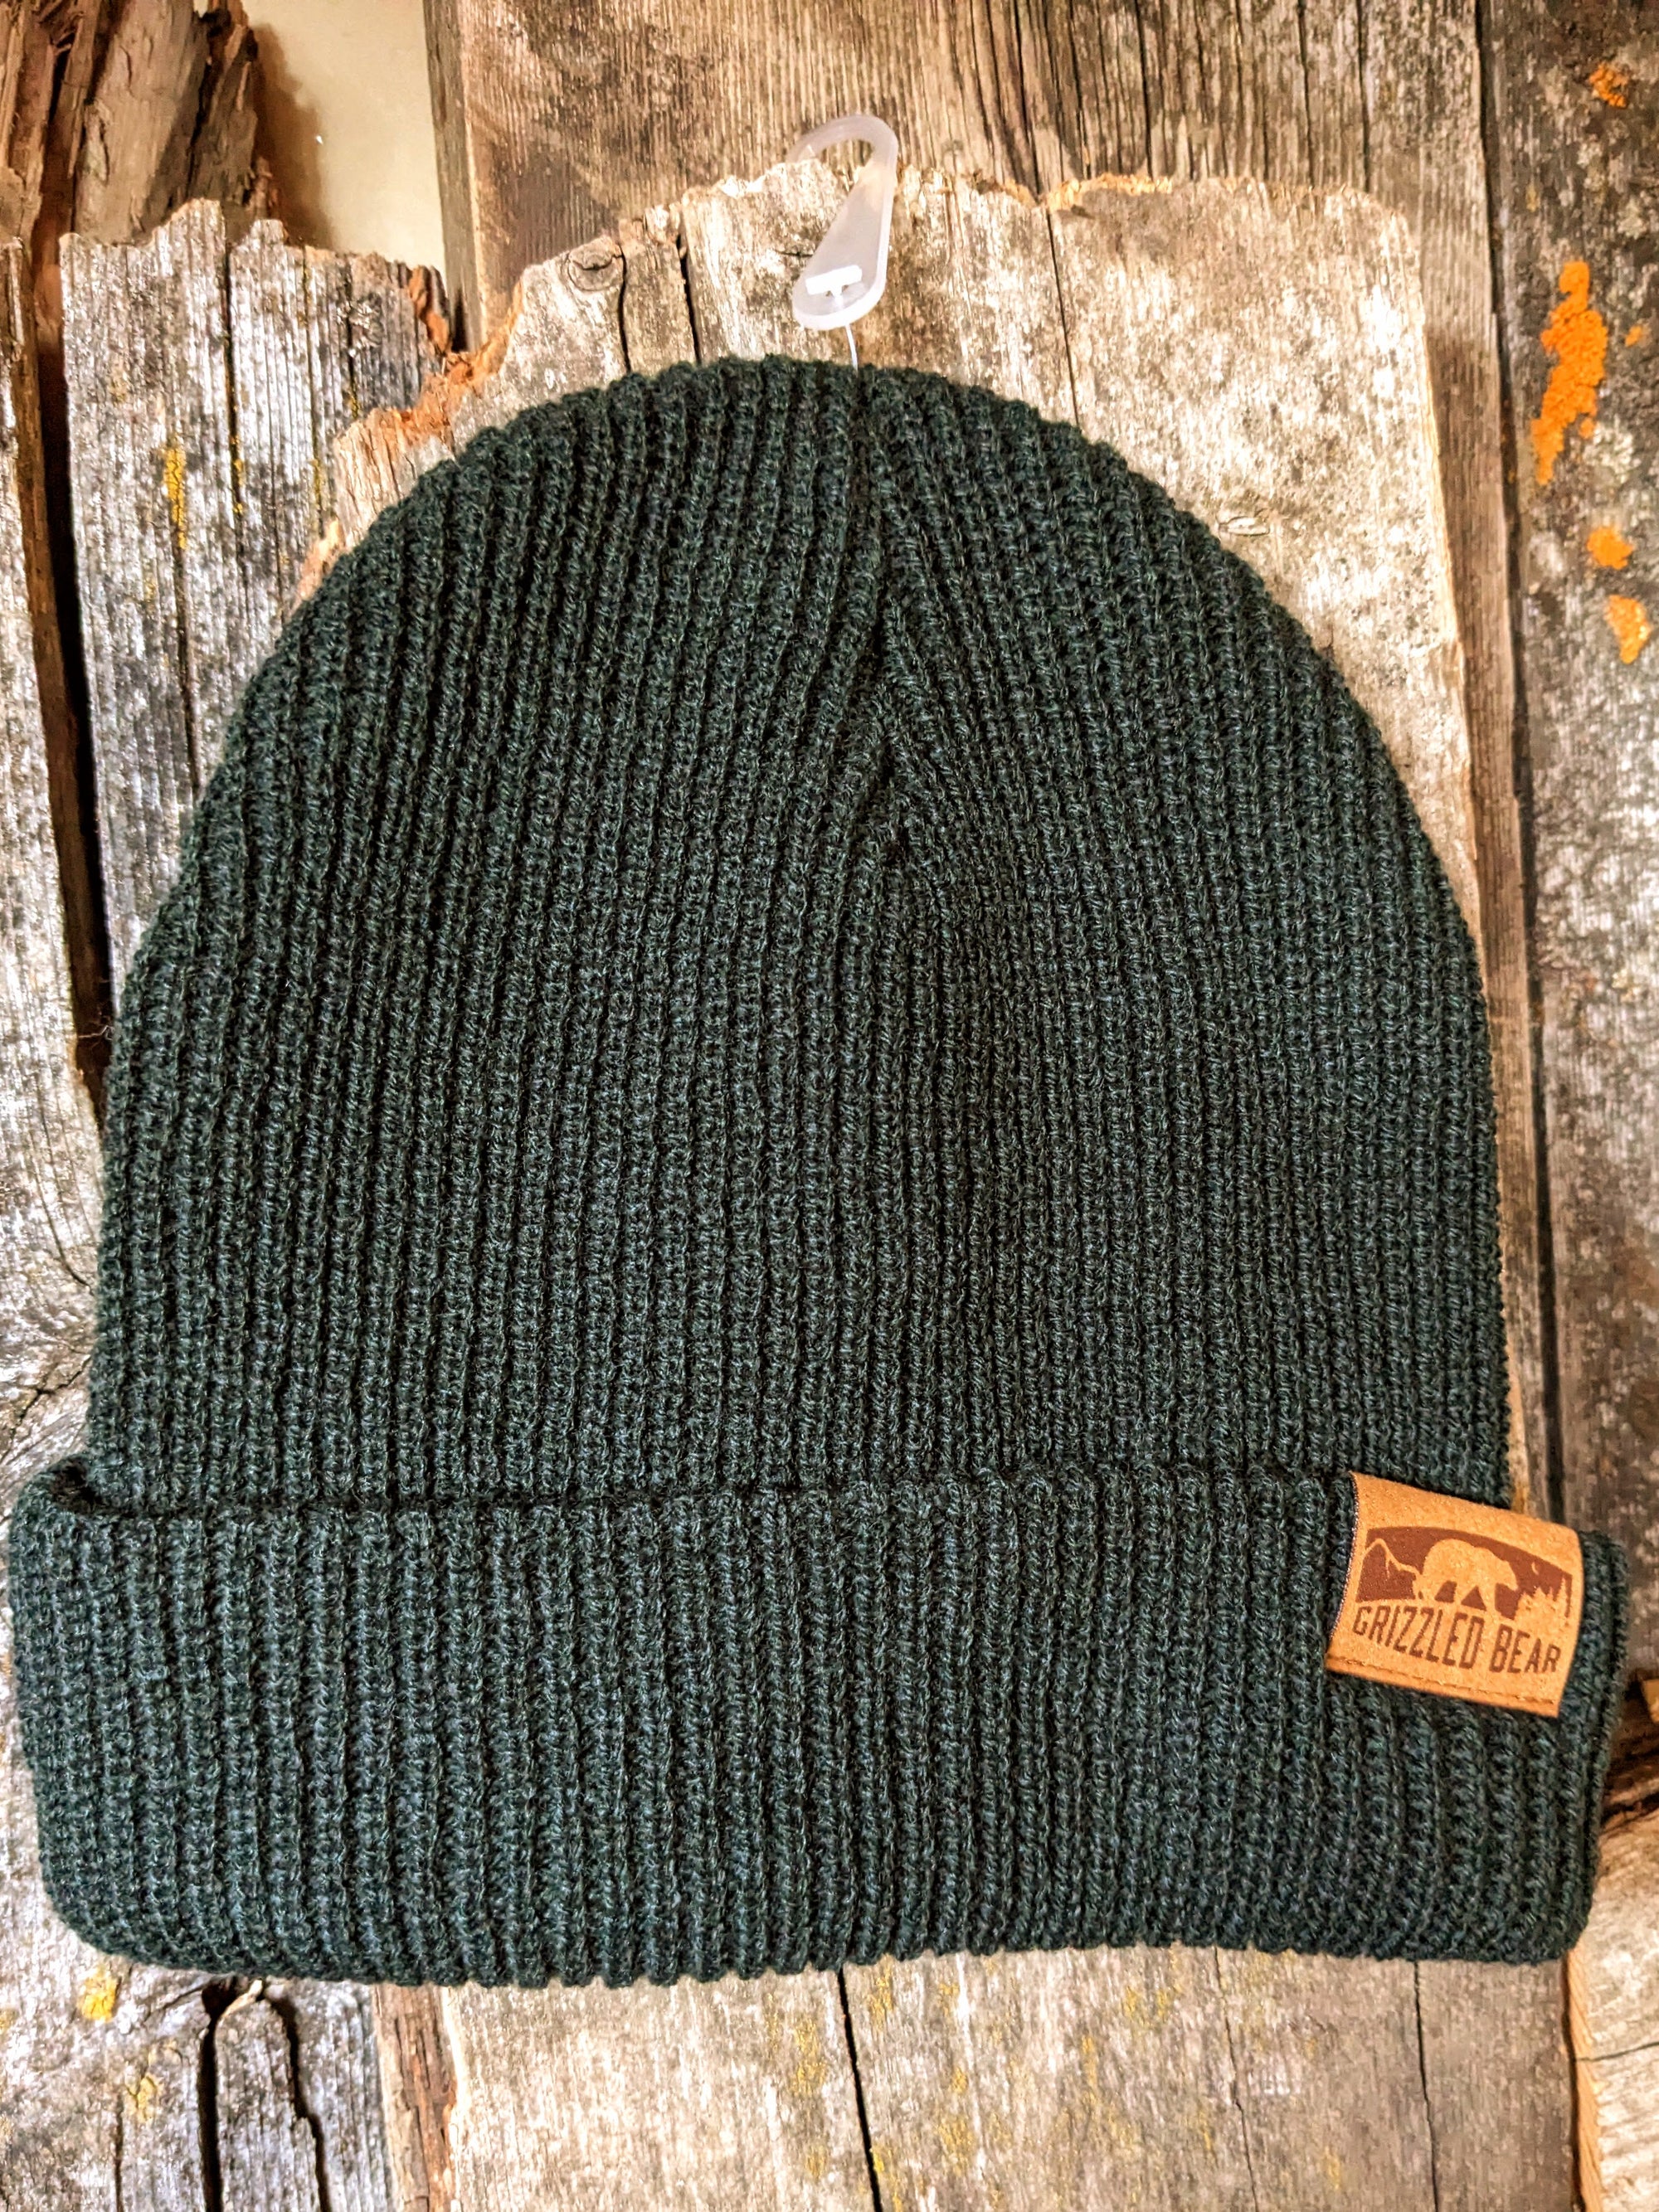 Cuffed knit leather clip Beanie - Forest